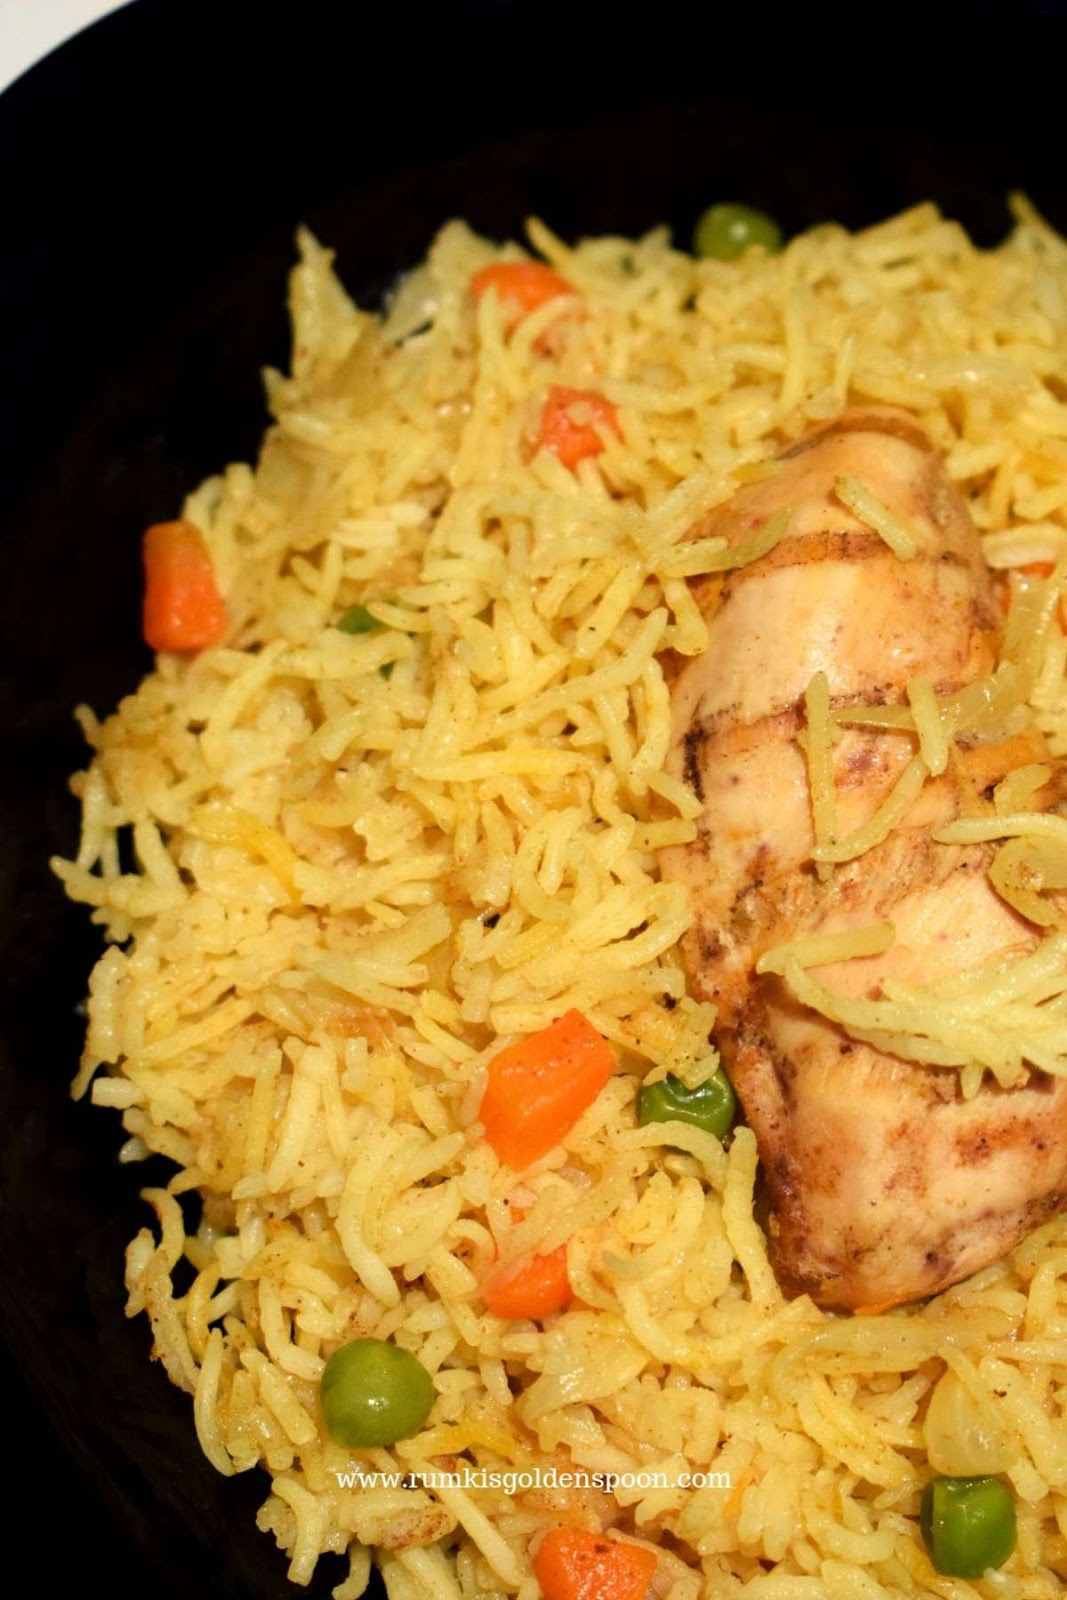 leftover chicken recipes, recipes for leftover chicken breast, recipes with leftover chicken breast, recipes with leftover chicken breast, recipes with leftover chicken breast, chicken pulao, leftover chicken and rice, one pot meal, rice recipe, Rumki's Golden Spoon